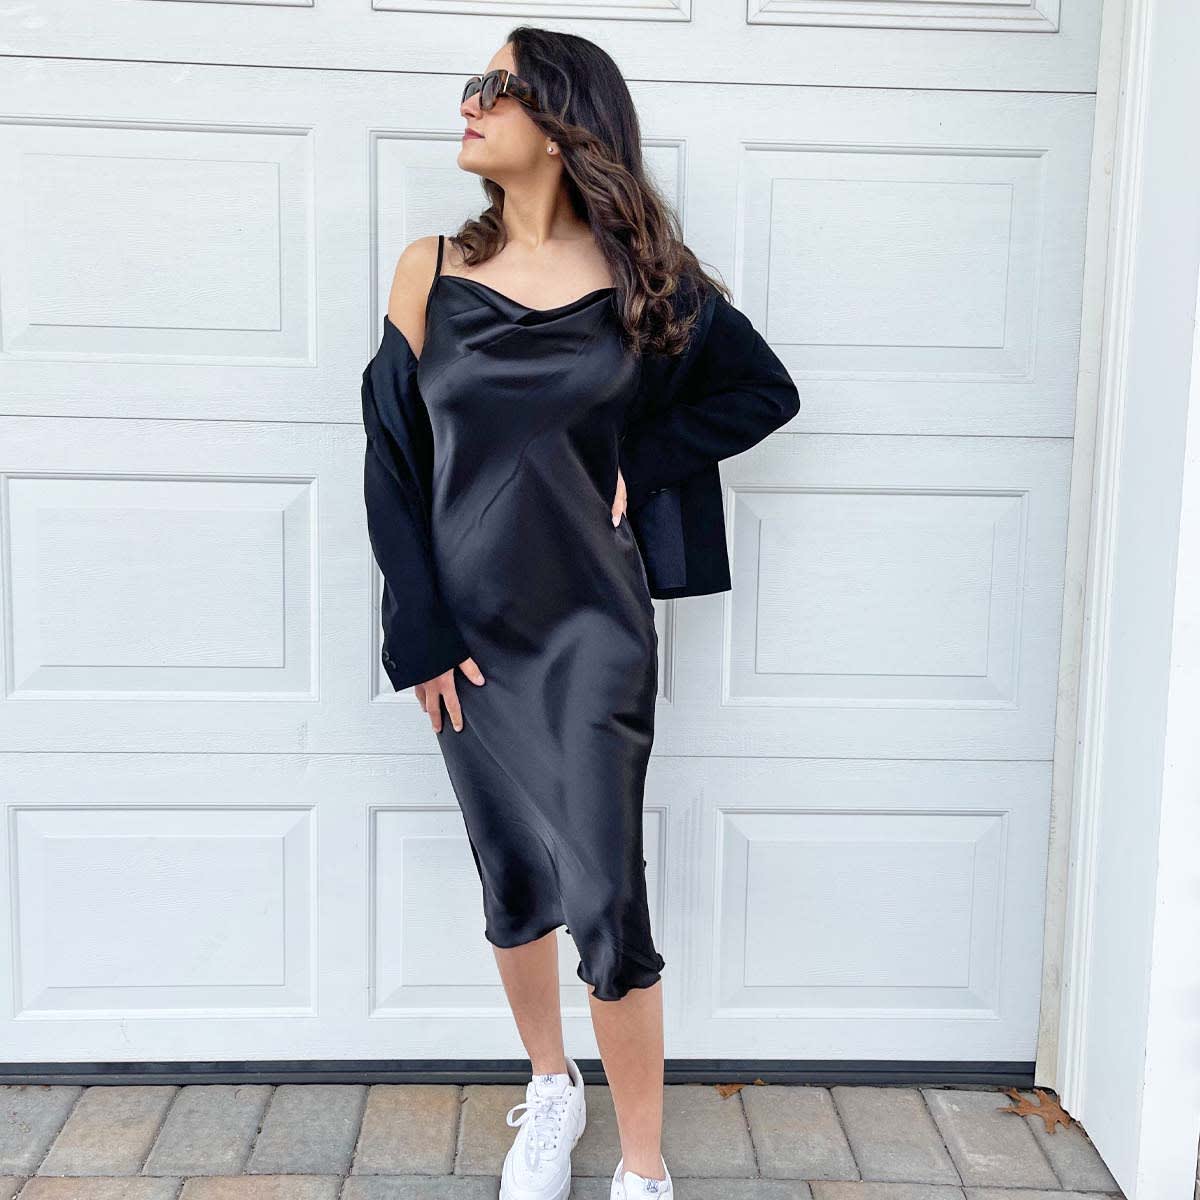 HOW TO ELEVATE A BLACK SLIP DRESS - Inspiring Wit